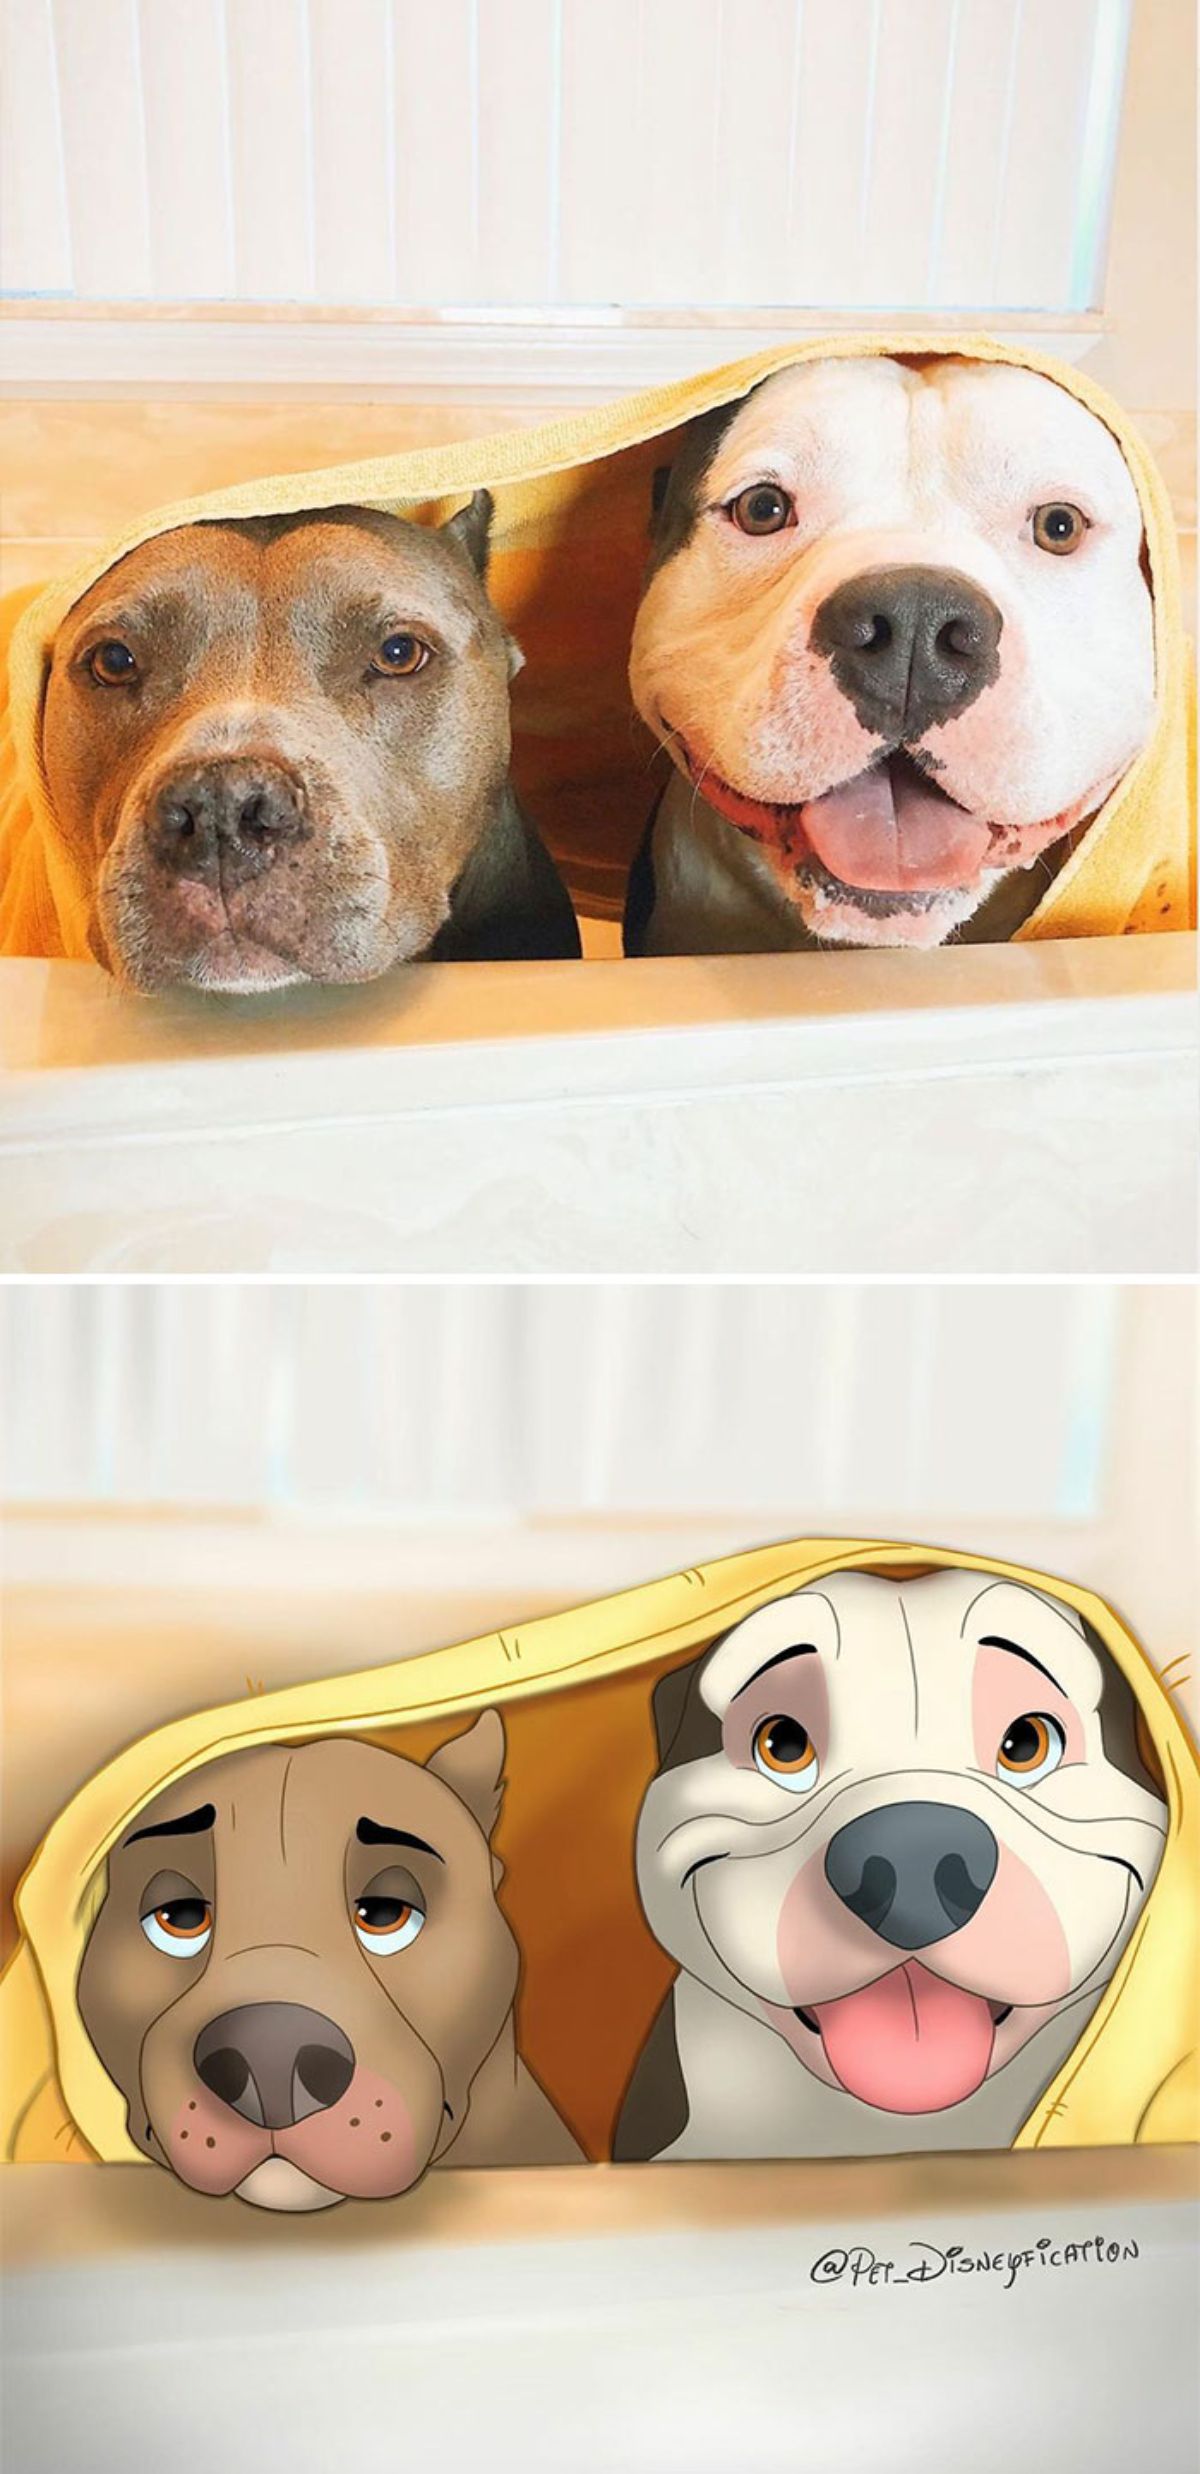 real photo and cartoon image of a brown pitbull and a white and black pitbull with a yellow towel on their heads